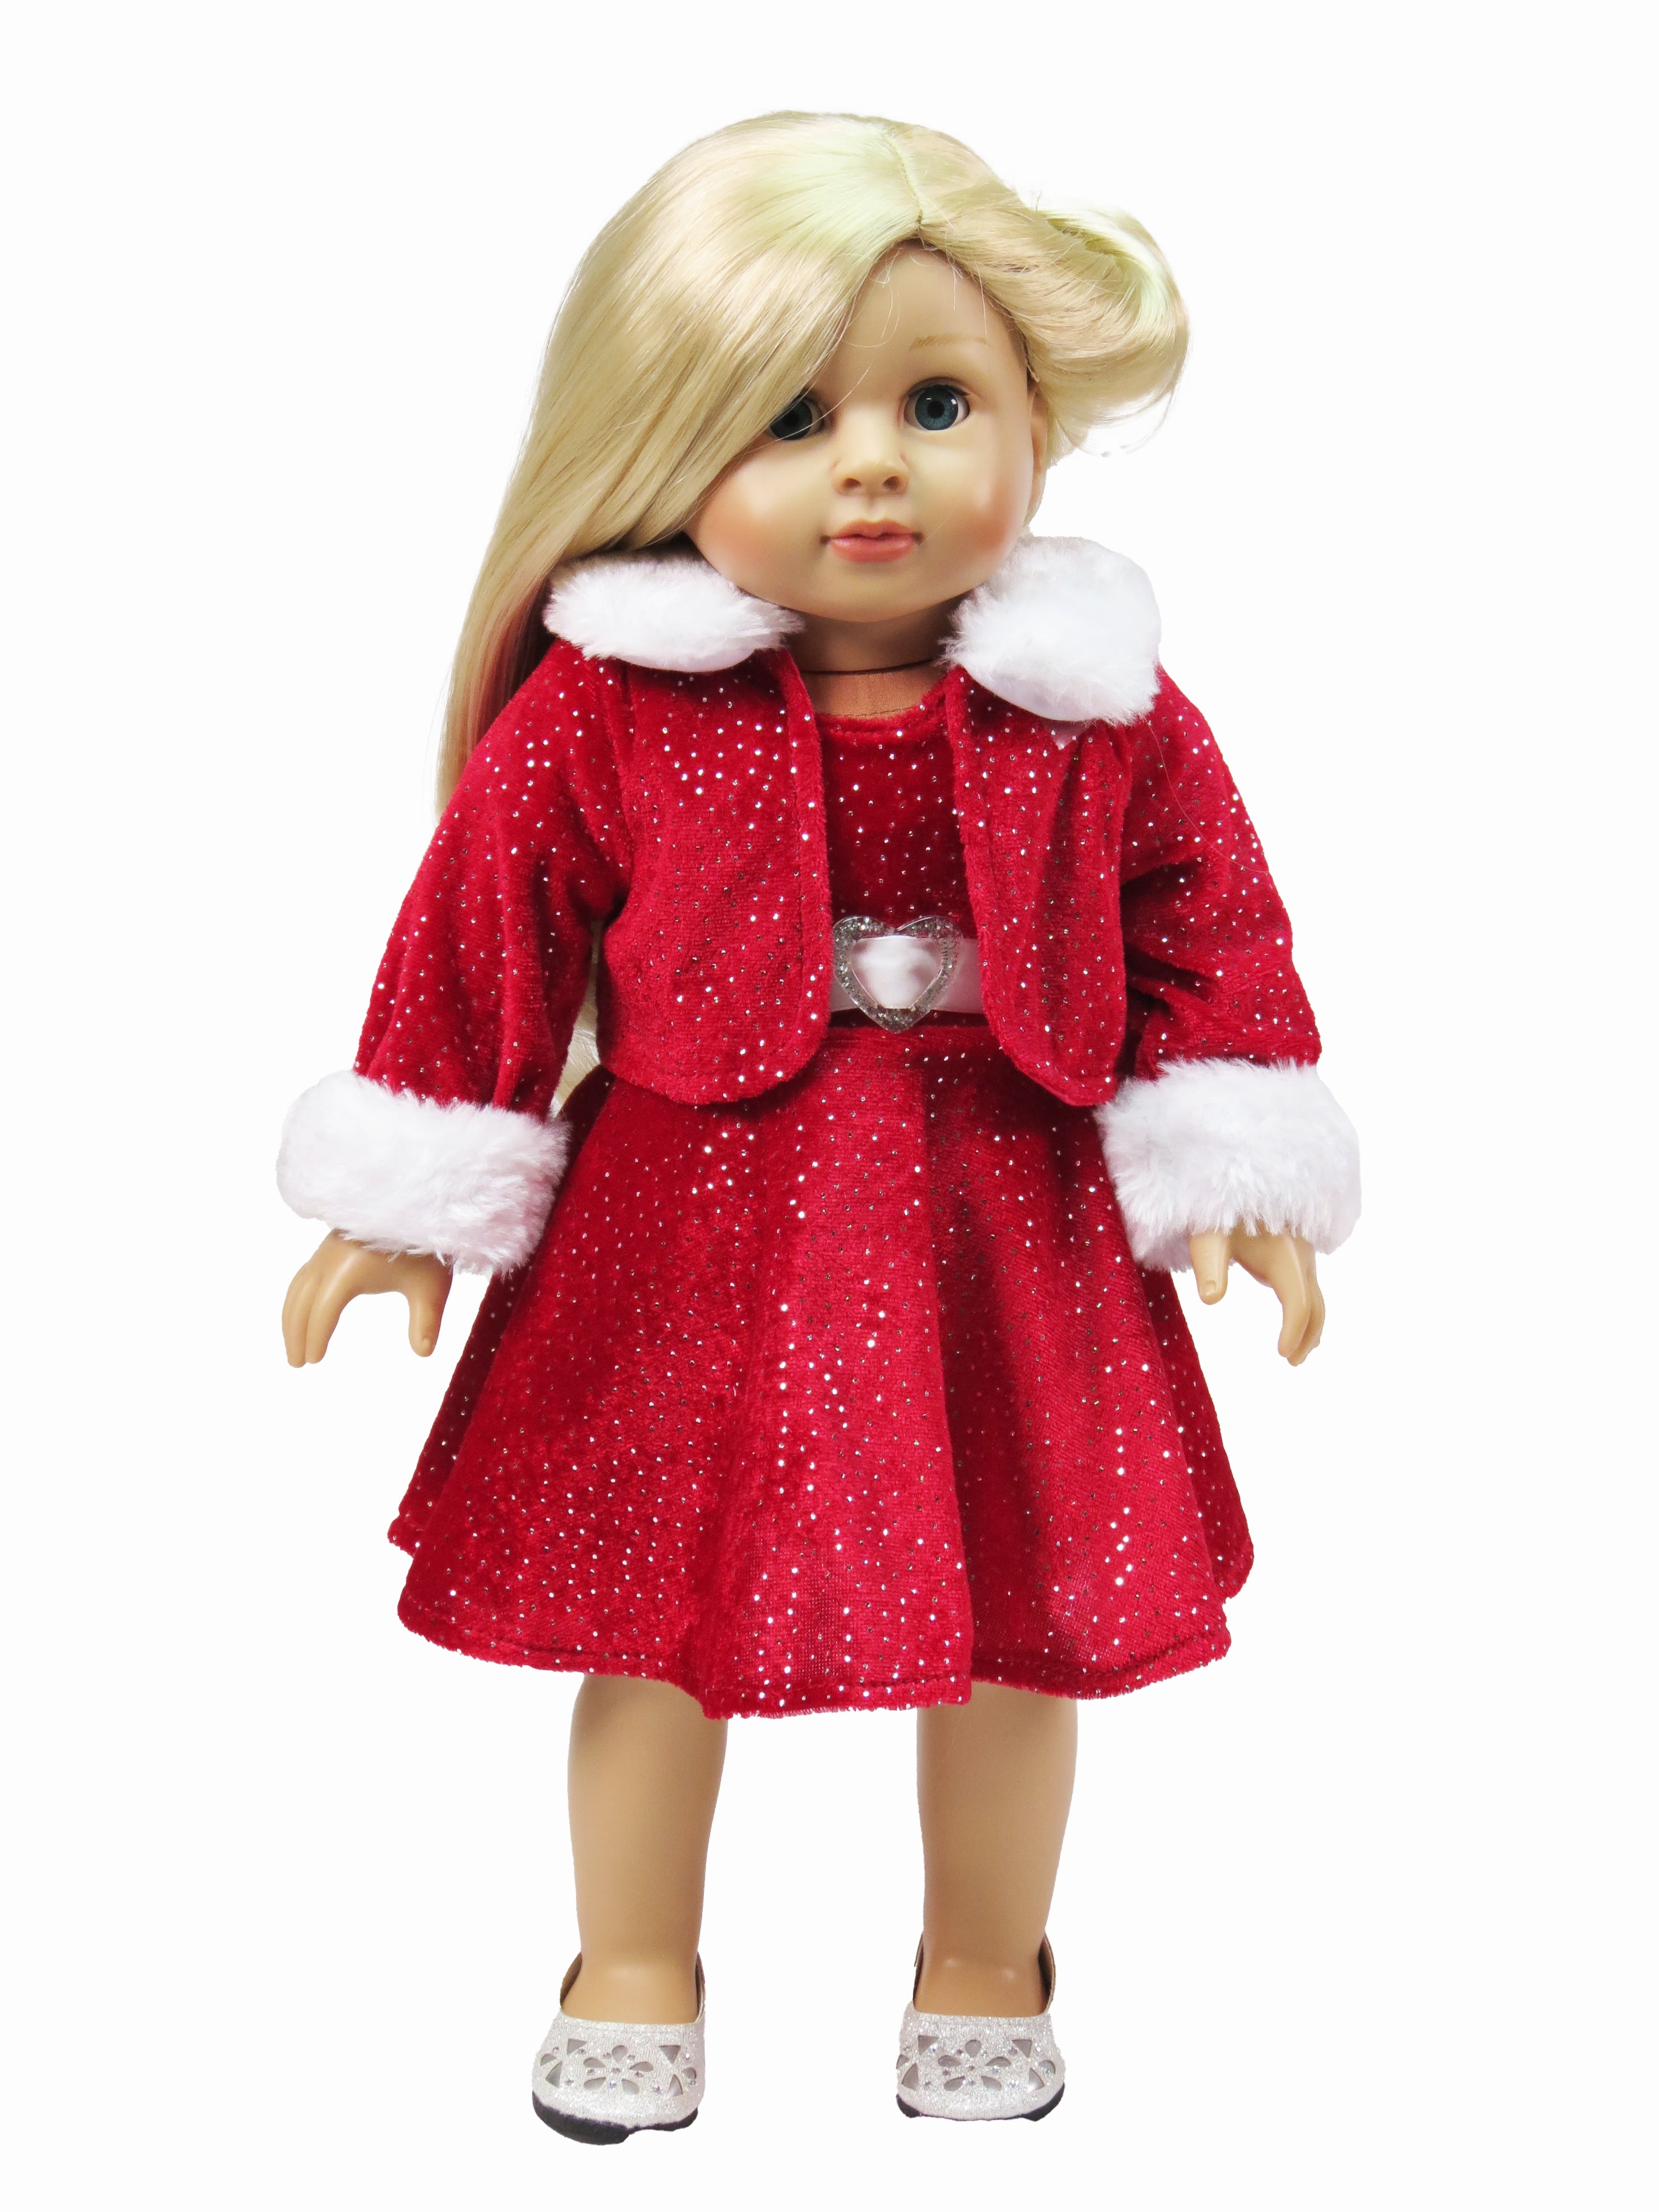 Hot Madame Handmade fashion Doll Clothes dress For 18 inch  Girl DolRD 